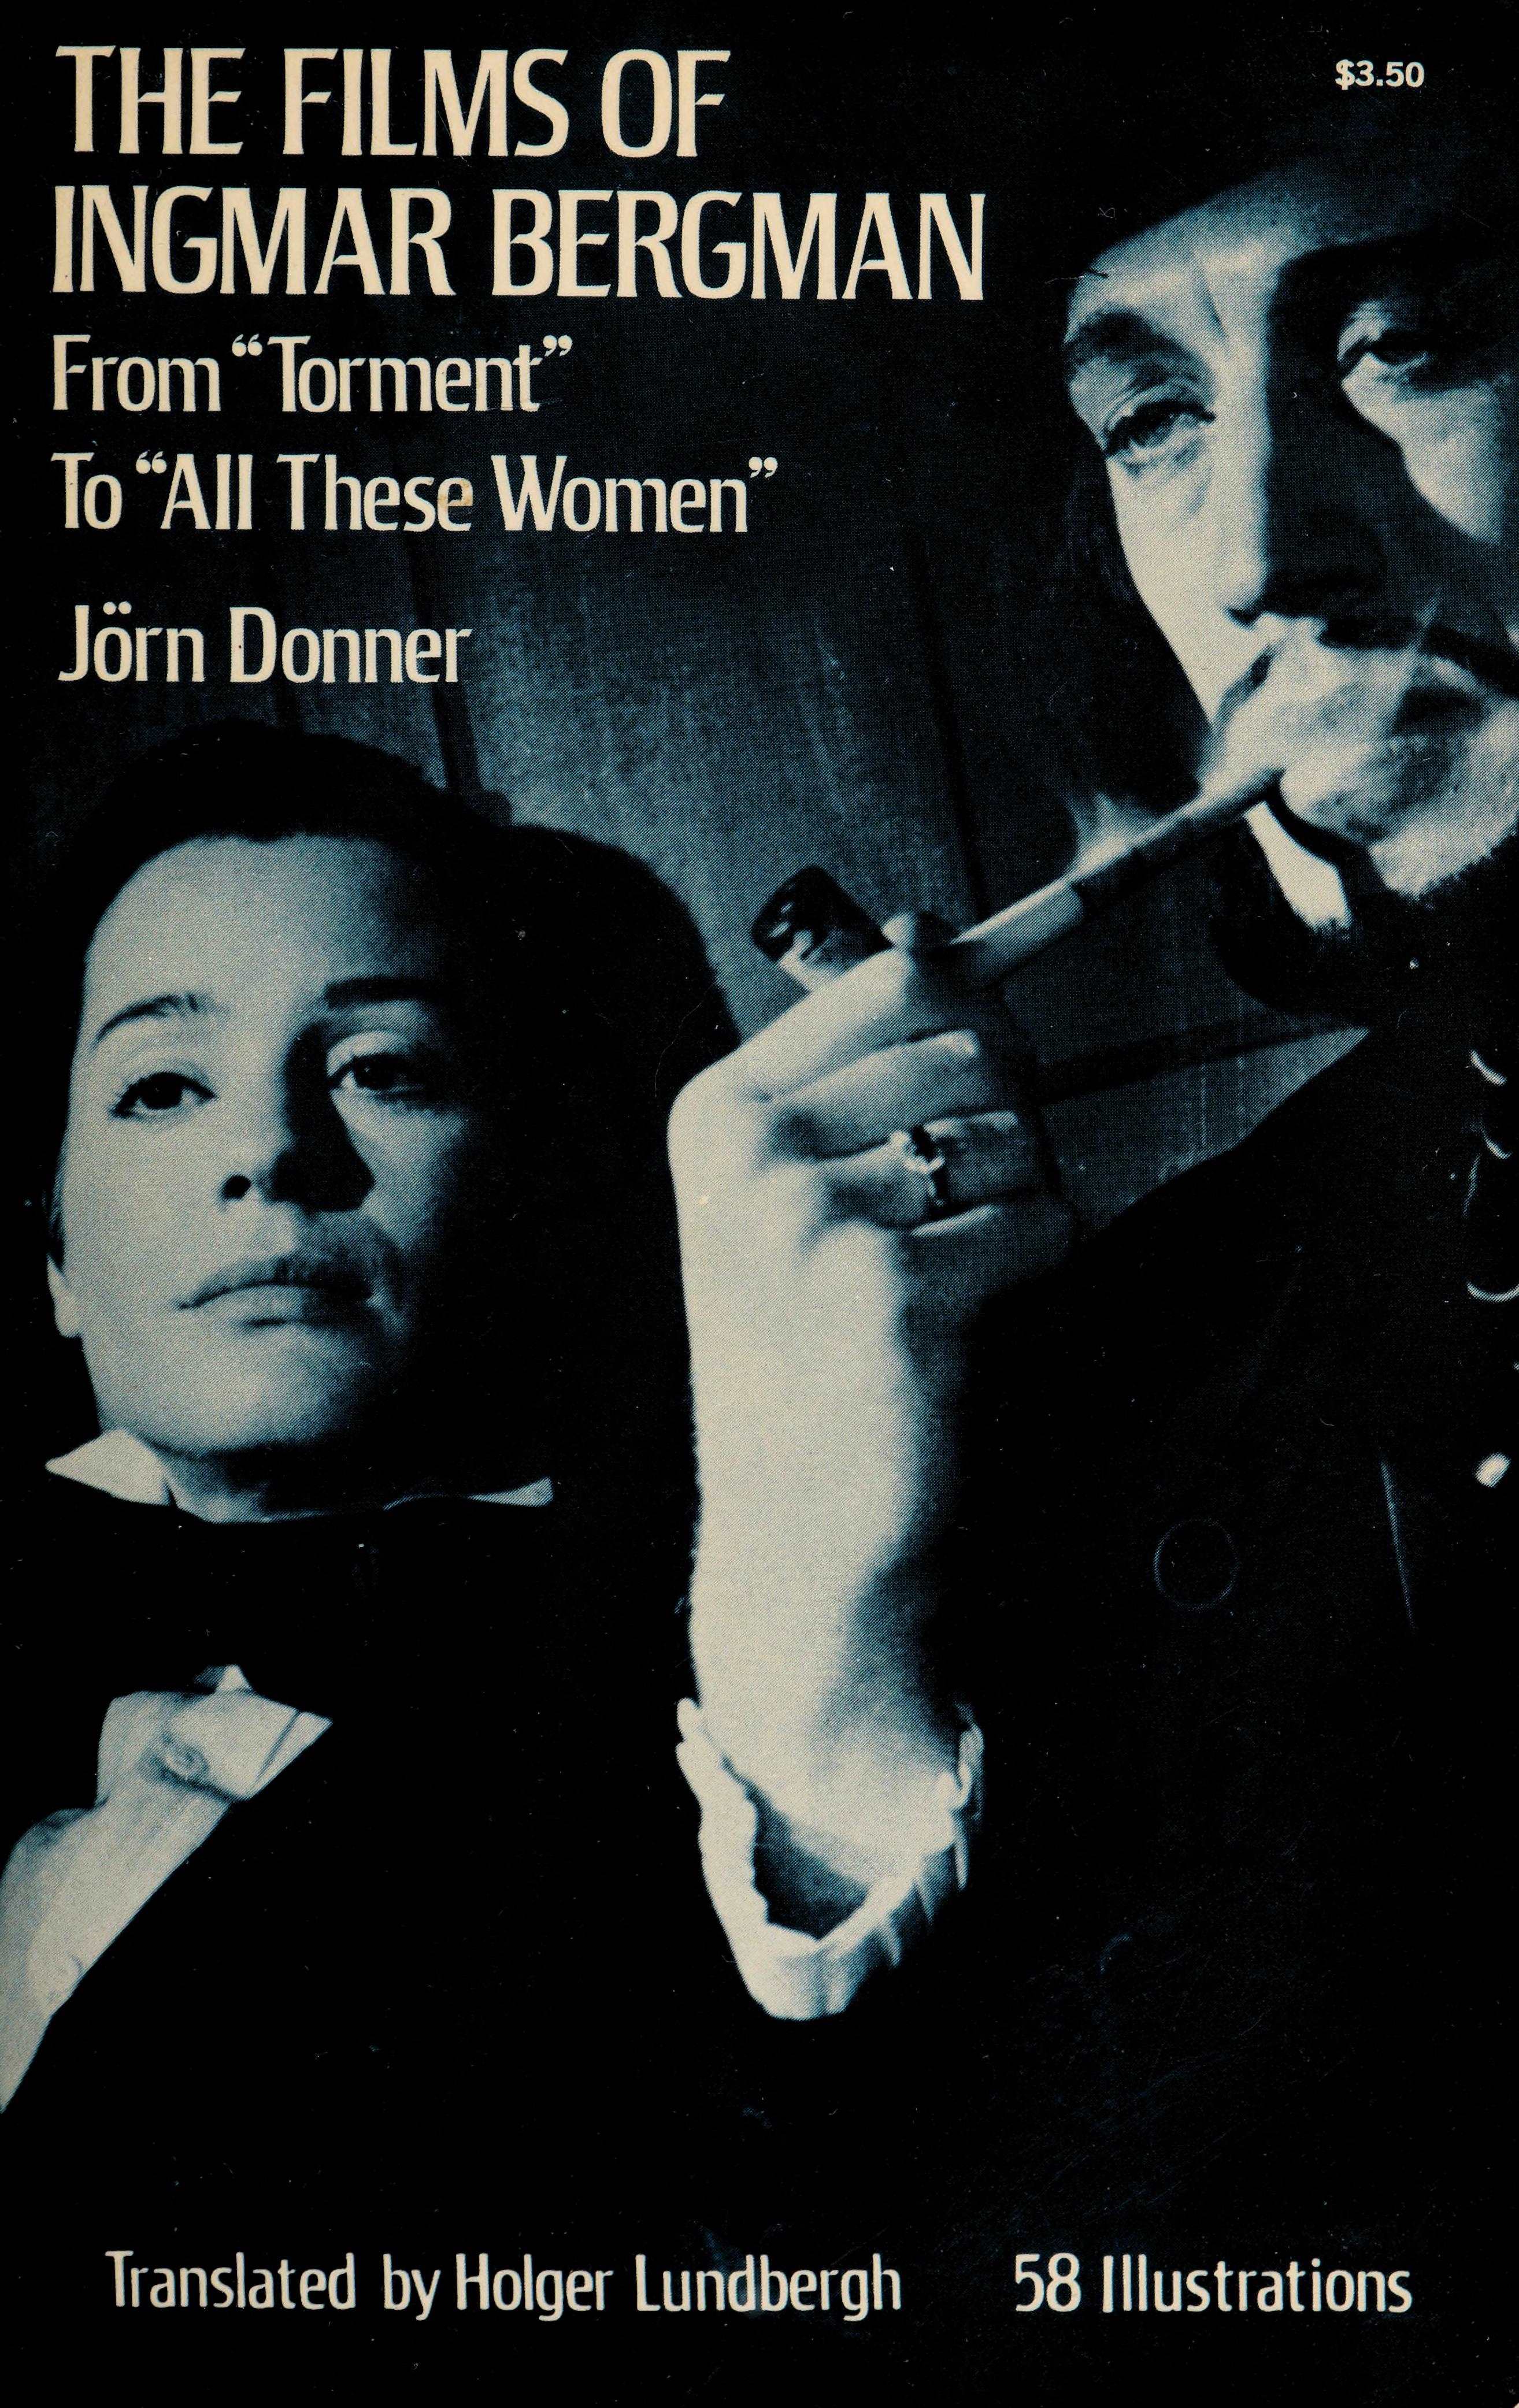 The Films of Ingmar Bergman: From Torment to All These Women. Paperback – June 1, 1972